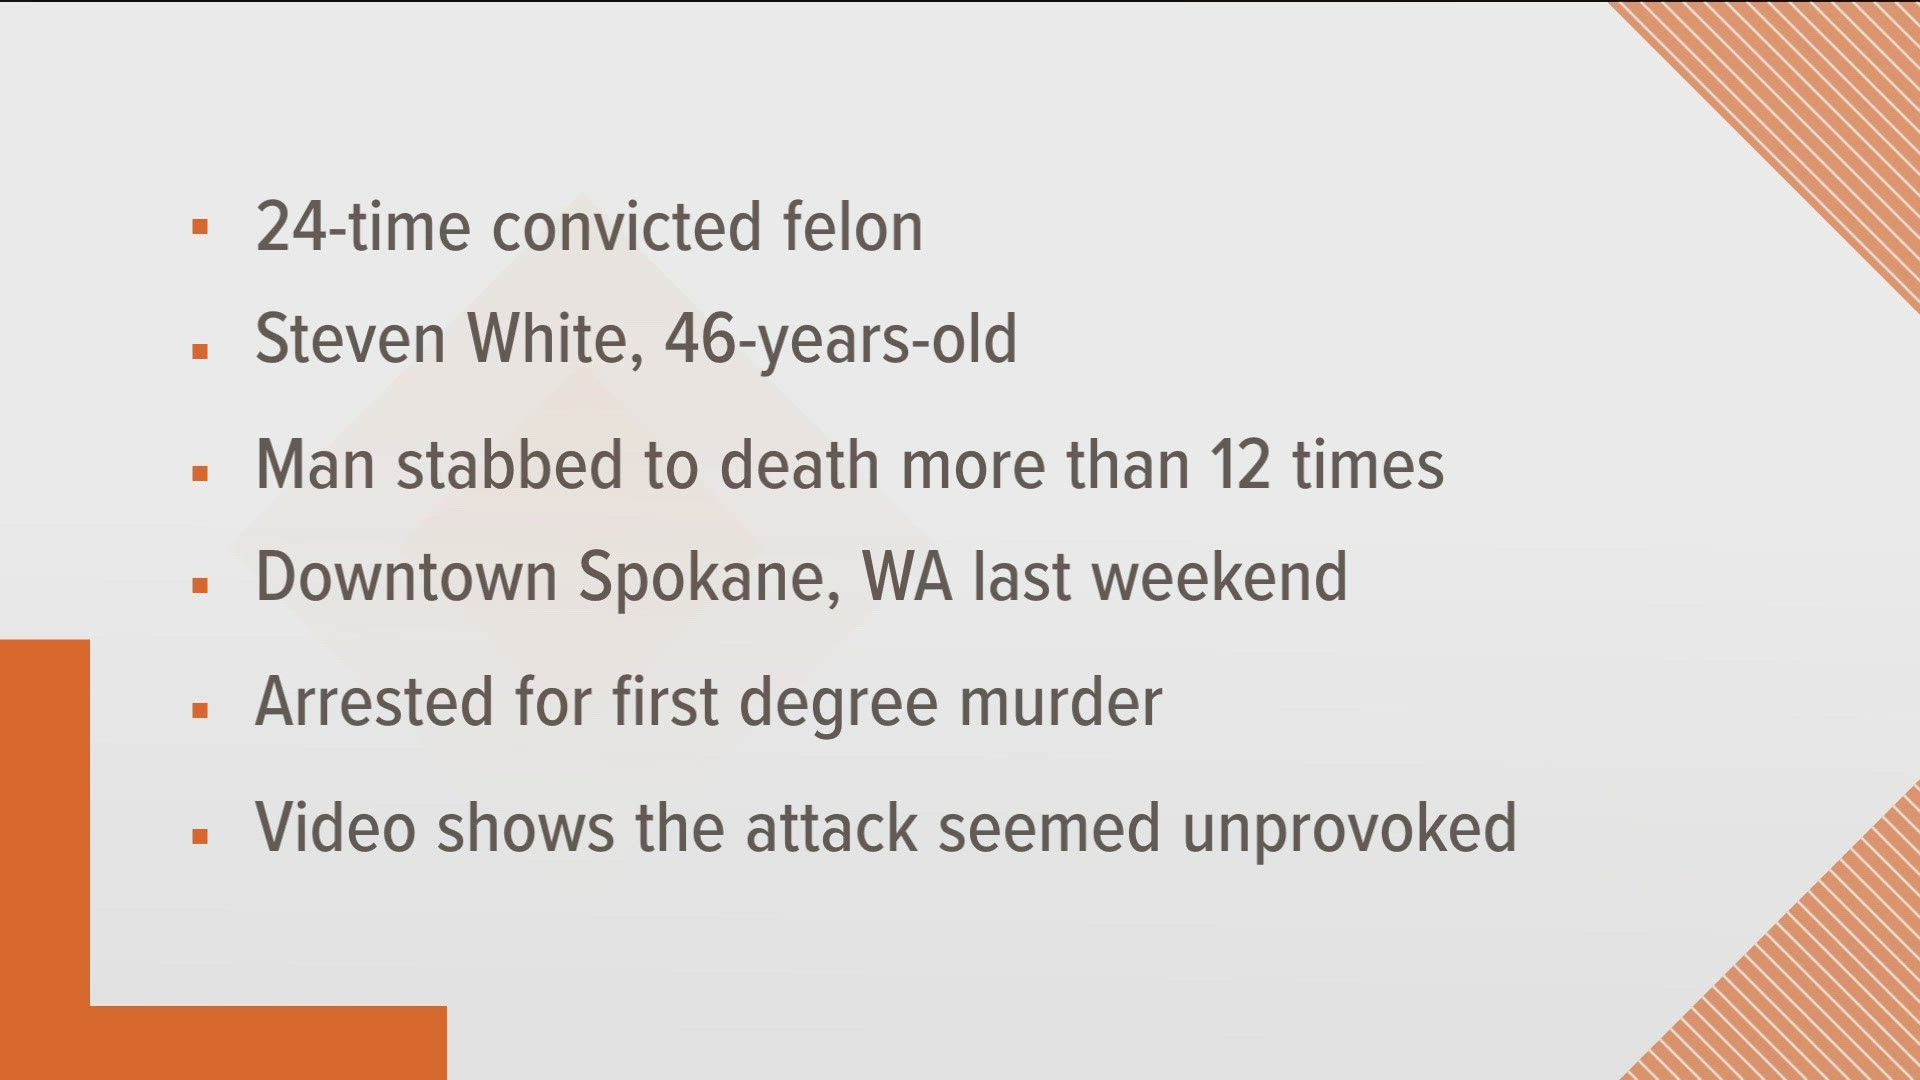 The 24-time convicted felon, Steven White, was arrested and charged for fatally stabbing a man in downtown Spokane more than a dozen times, according to police.